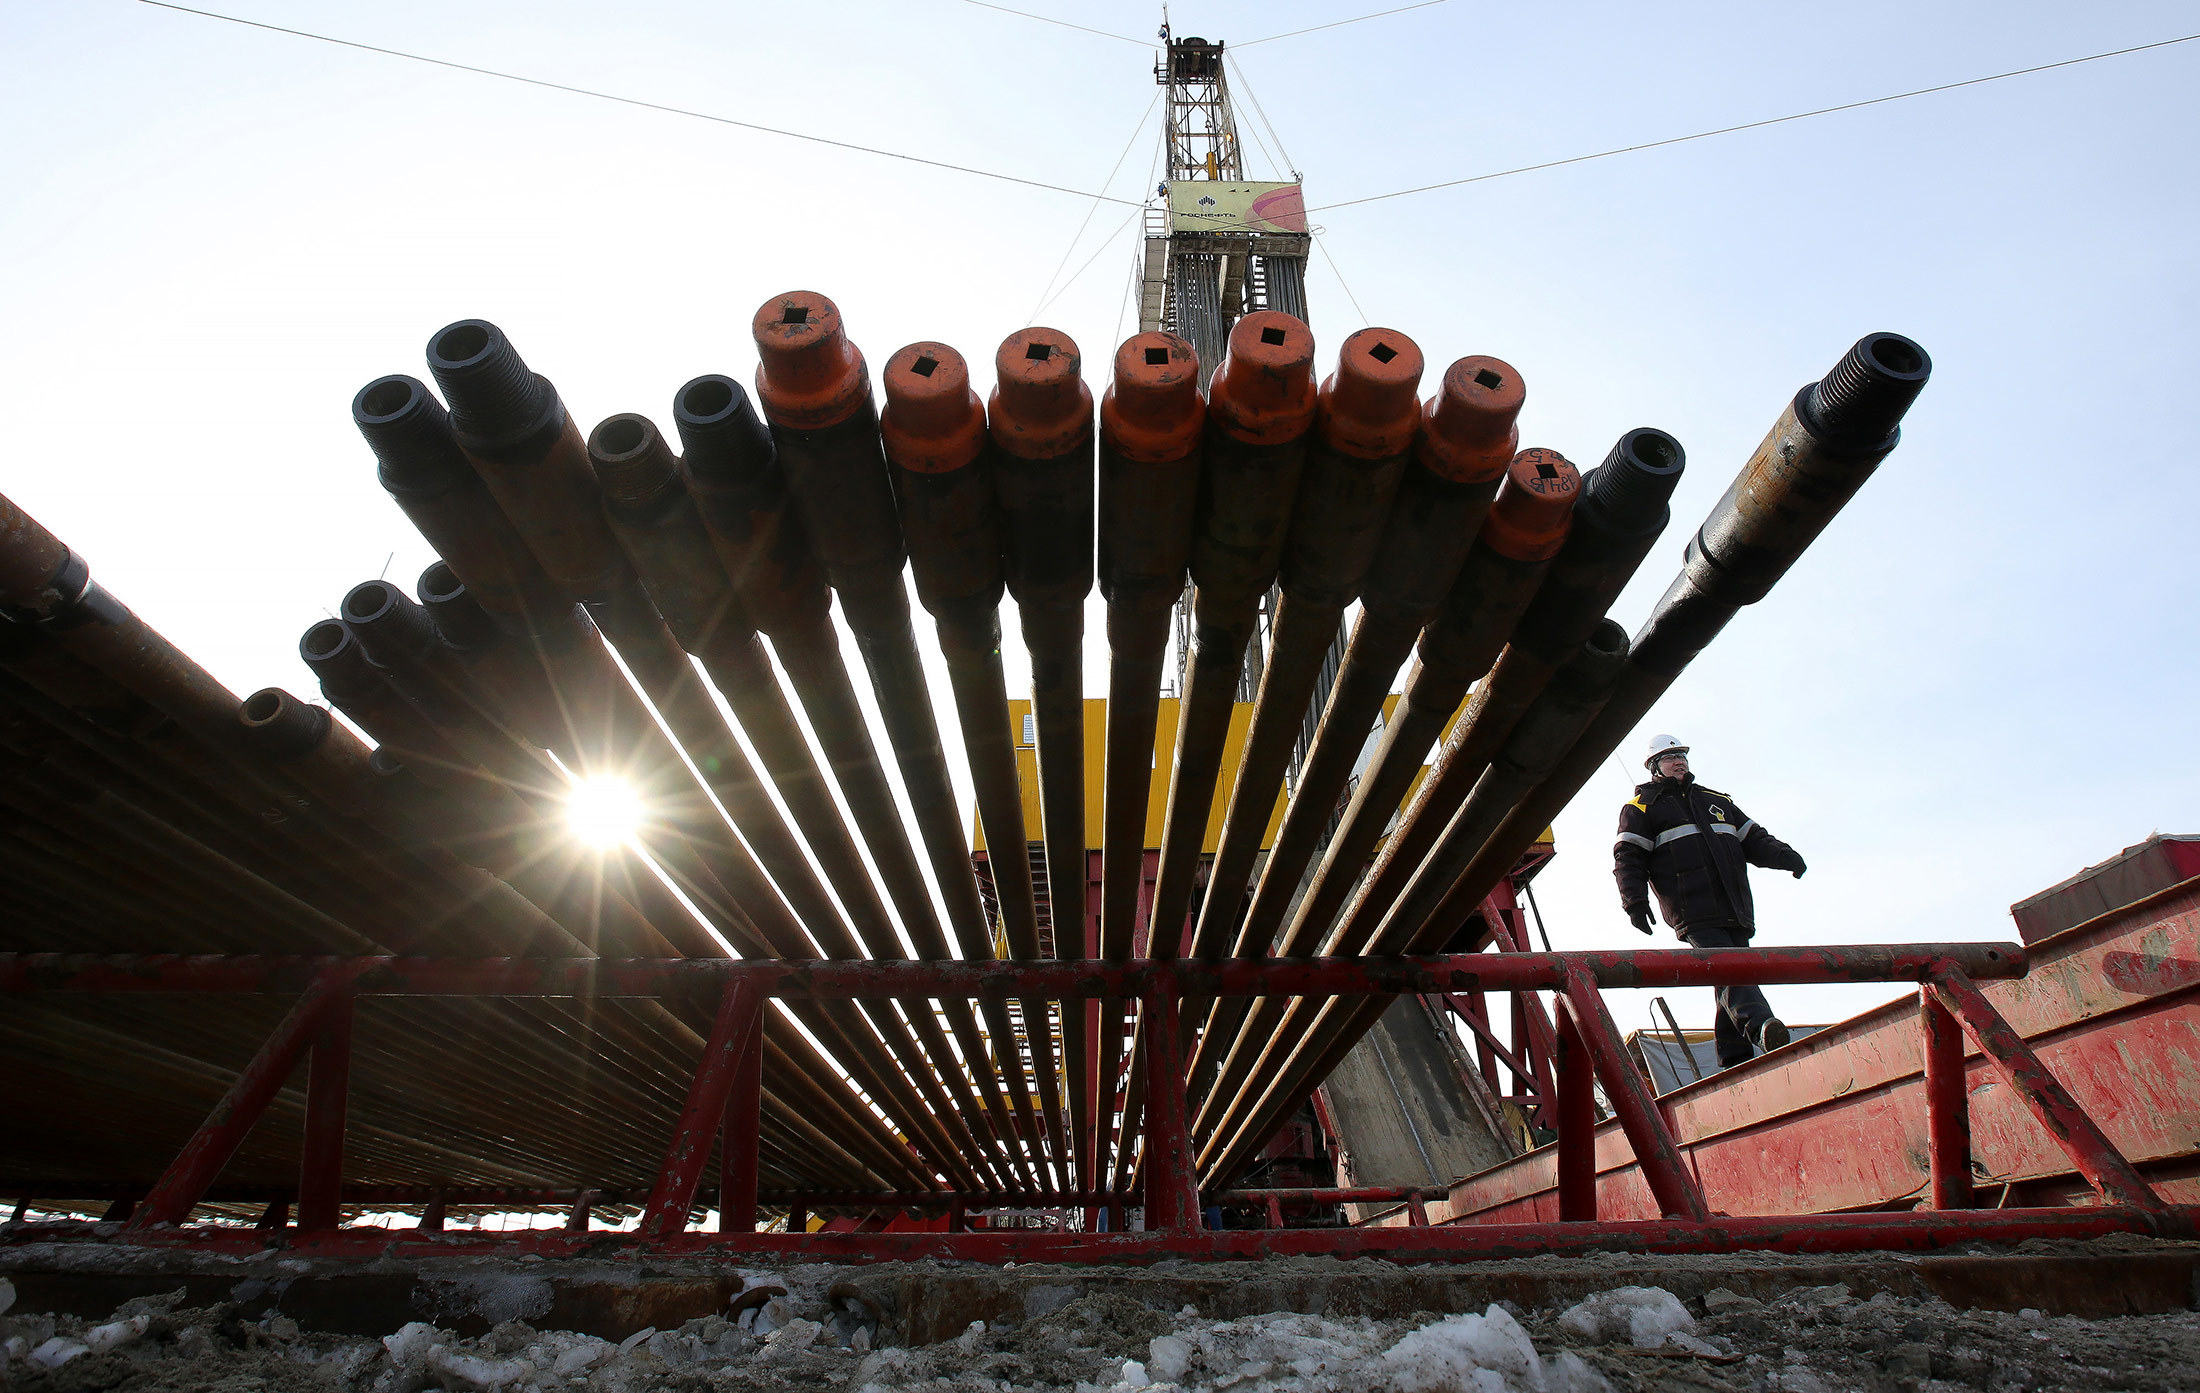 A worker passes an oil drilling rig and drill pipes, operated by Rosneft PJSC, in the Samotlor oilfield near Nizhnevartovsk, Russia, on Tuesday, March 21, 2017. Russia's largest oil field, so far past its prime that it now pumps almost 20 times more water than crude, could be on the verge of gushing profits again for Rosneft PJSC. Photographer: Andrey Rudakov/Bloomberg